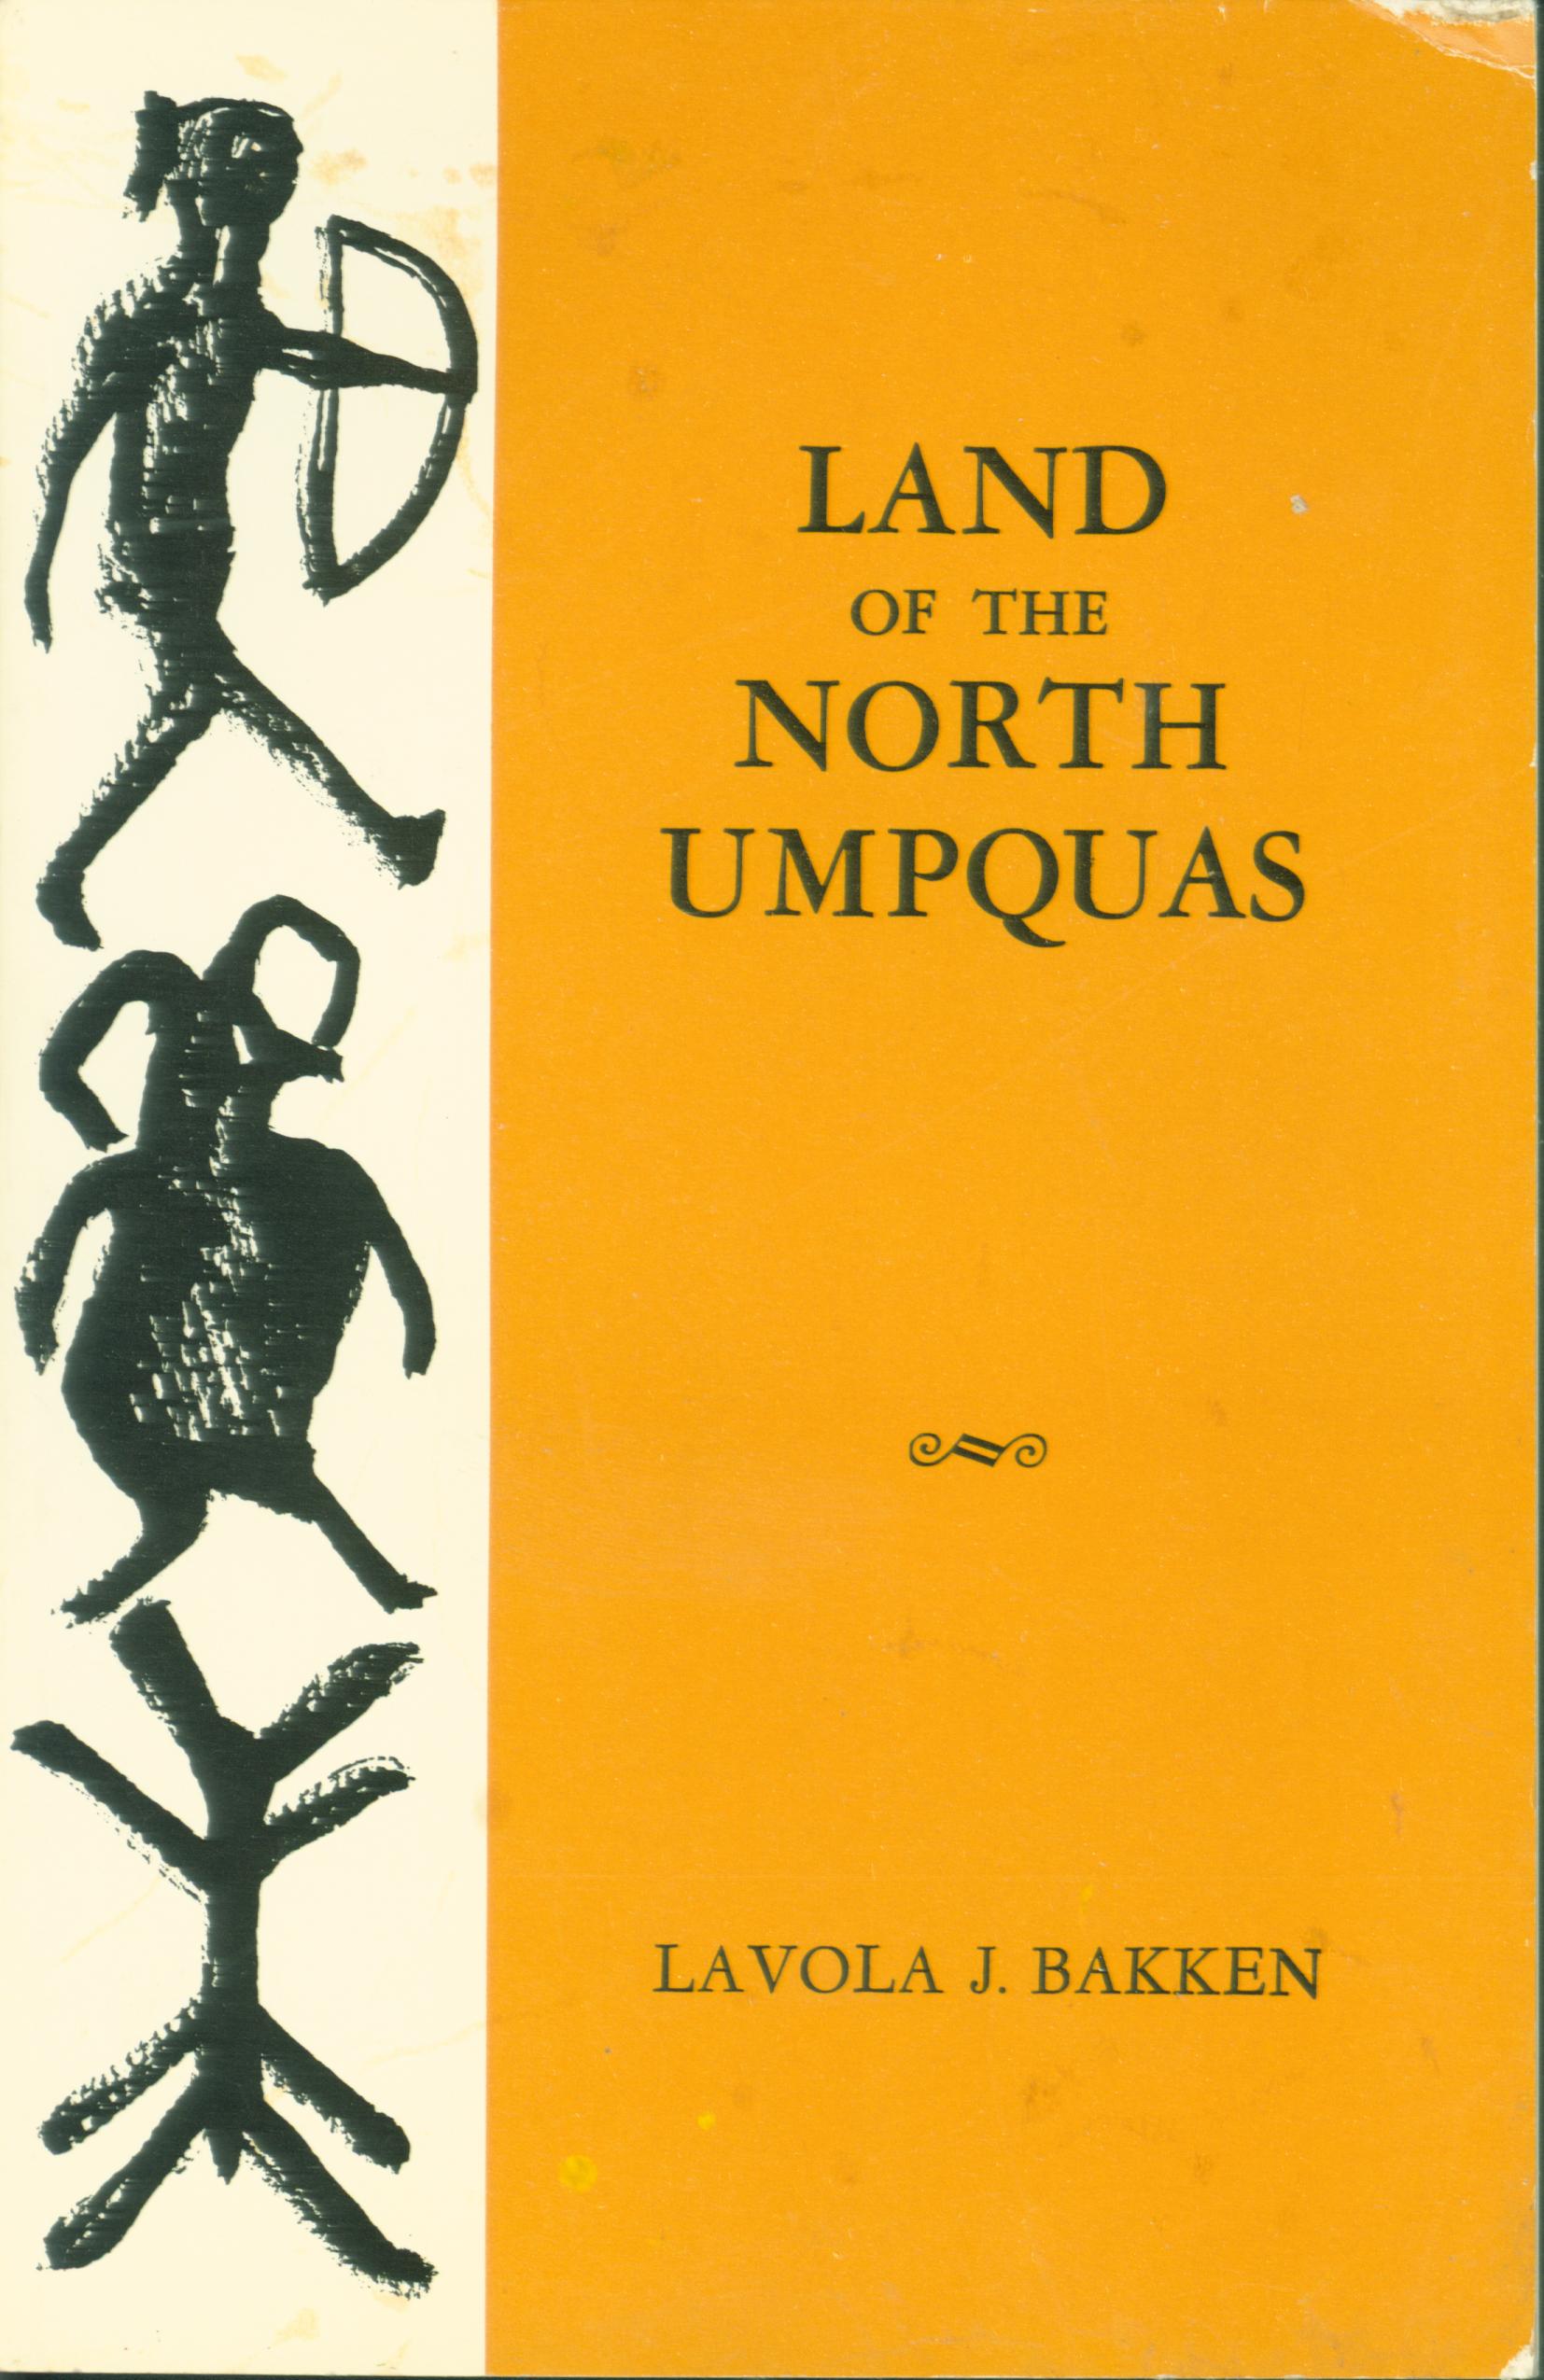 LAND OF THE NORTH UMPQUAS: peaceful Indians of the West.